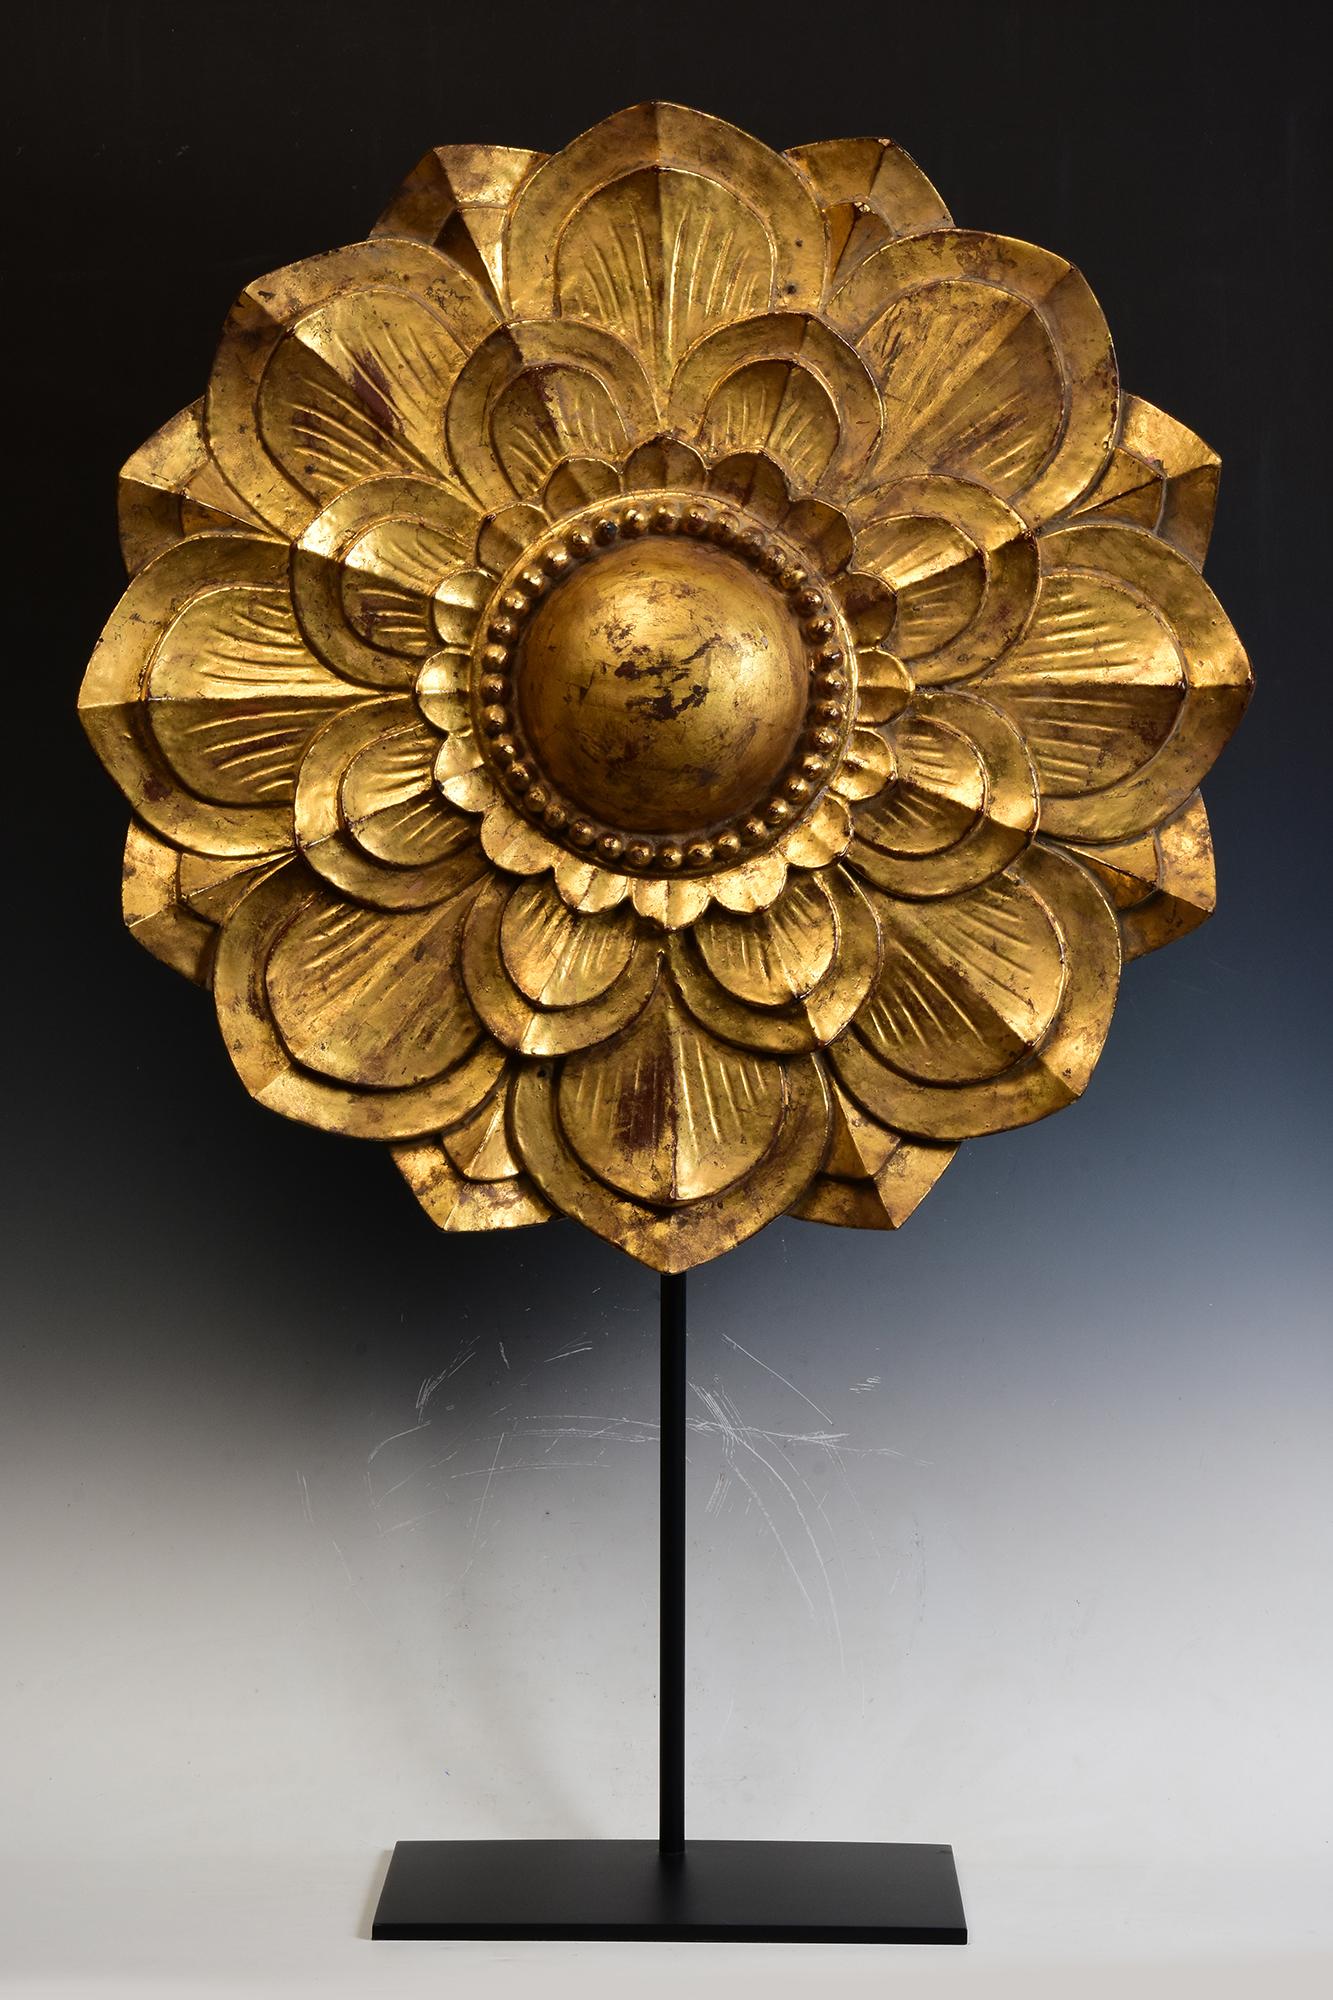 Large Burmese wooden flower decoration with gilded gold.

Age: Burma, Mandalay Period, 19th Century
Size of flower only: Diameter 69.5 C.M. / Thickness 10 C.M.
Height including stand: 108 C.M.
Condition: Nice condition overall (some expected